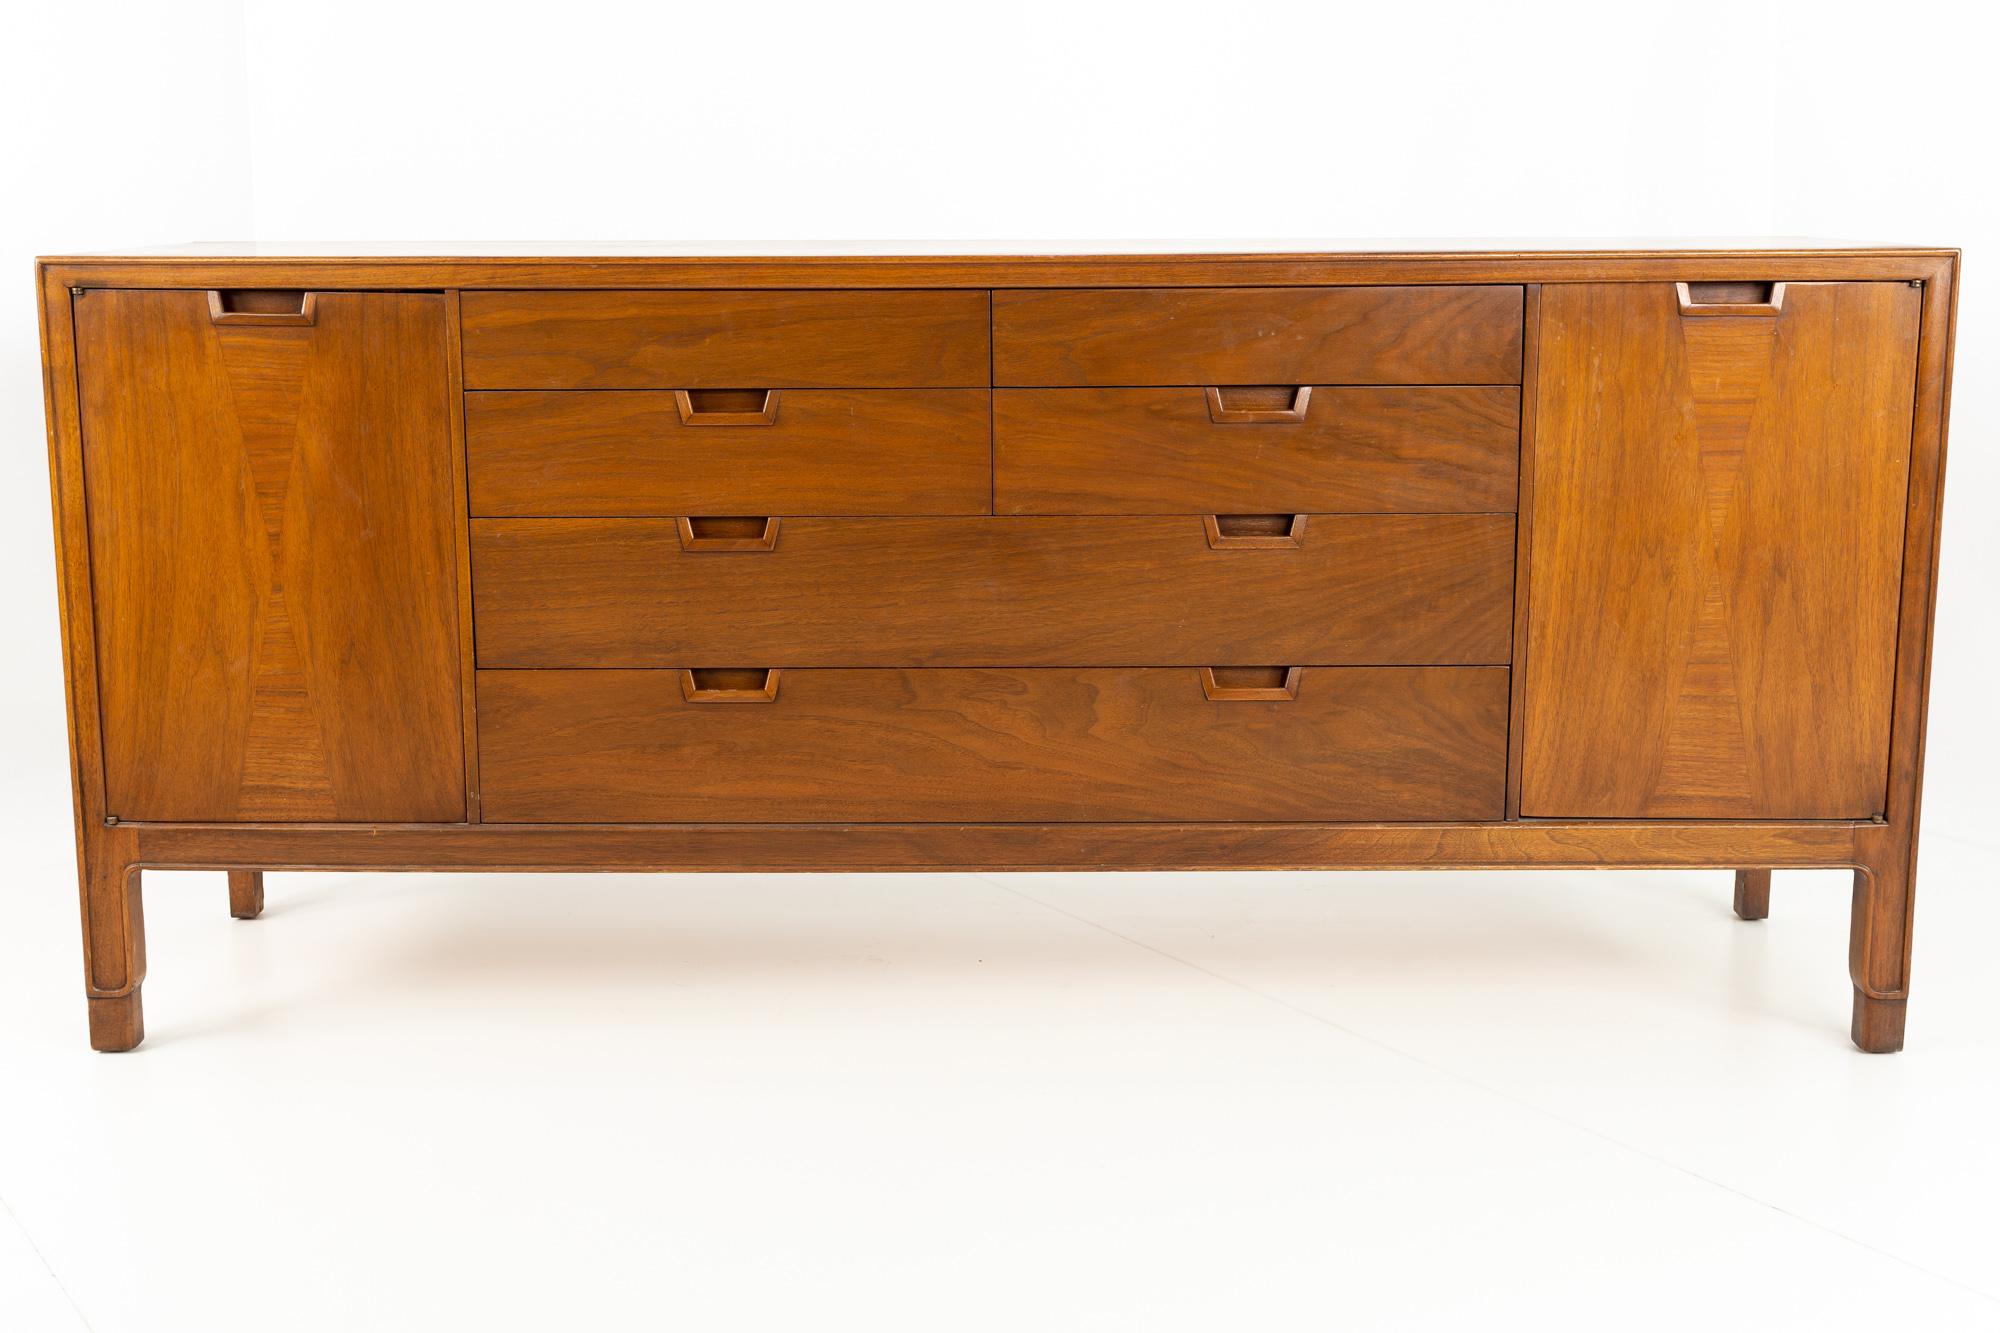 Mount Airy Mid Century Janus Collection 14-drawer walnut lowboy dresser.
This lowboy measures 71.75 wide x 19 deep x 31.5 inches high

All pieces of furniture can be had in what we call restored vintage condition. That means the piece is restored